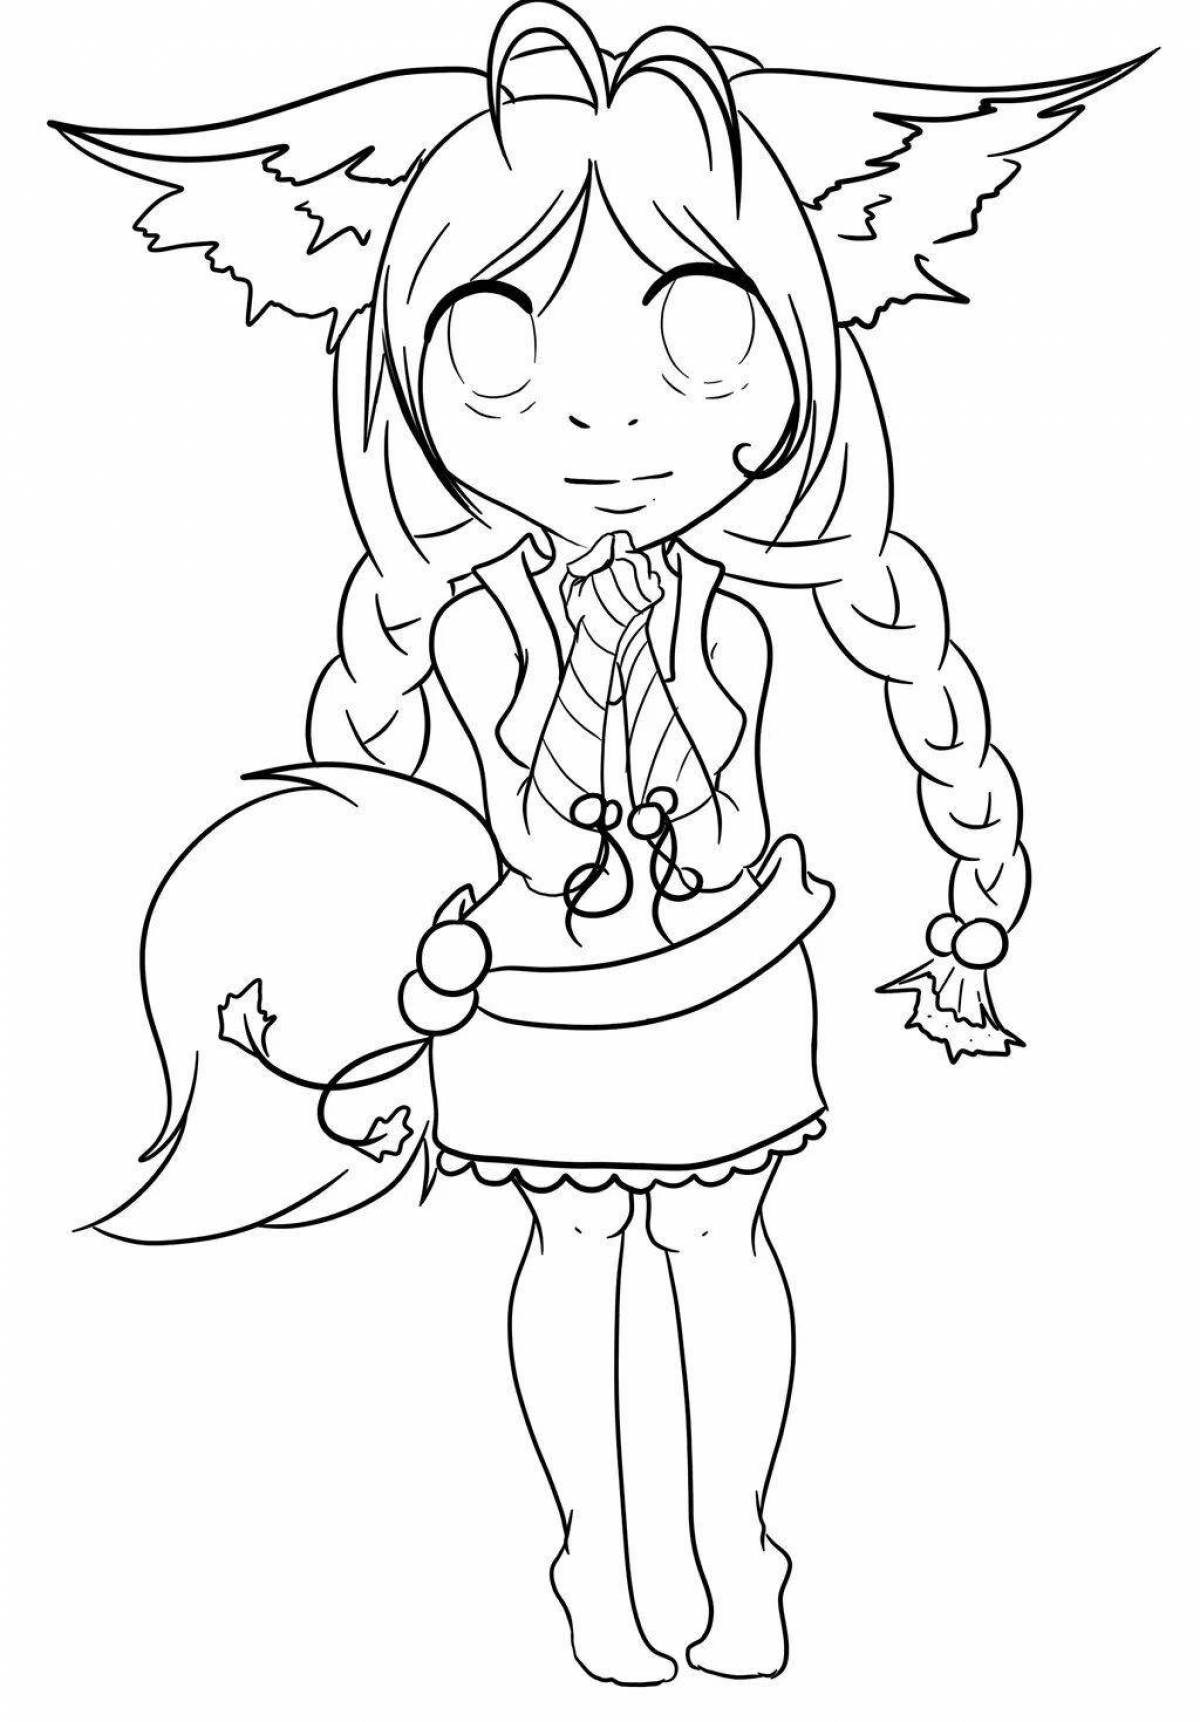 Radiant coloring page fox girl